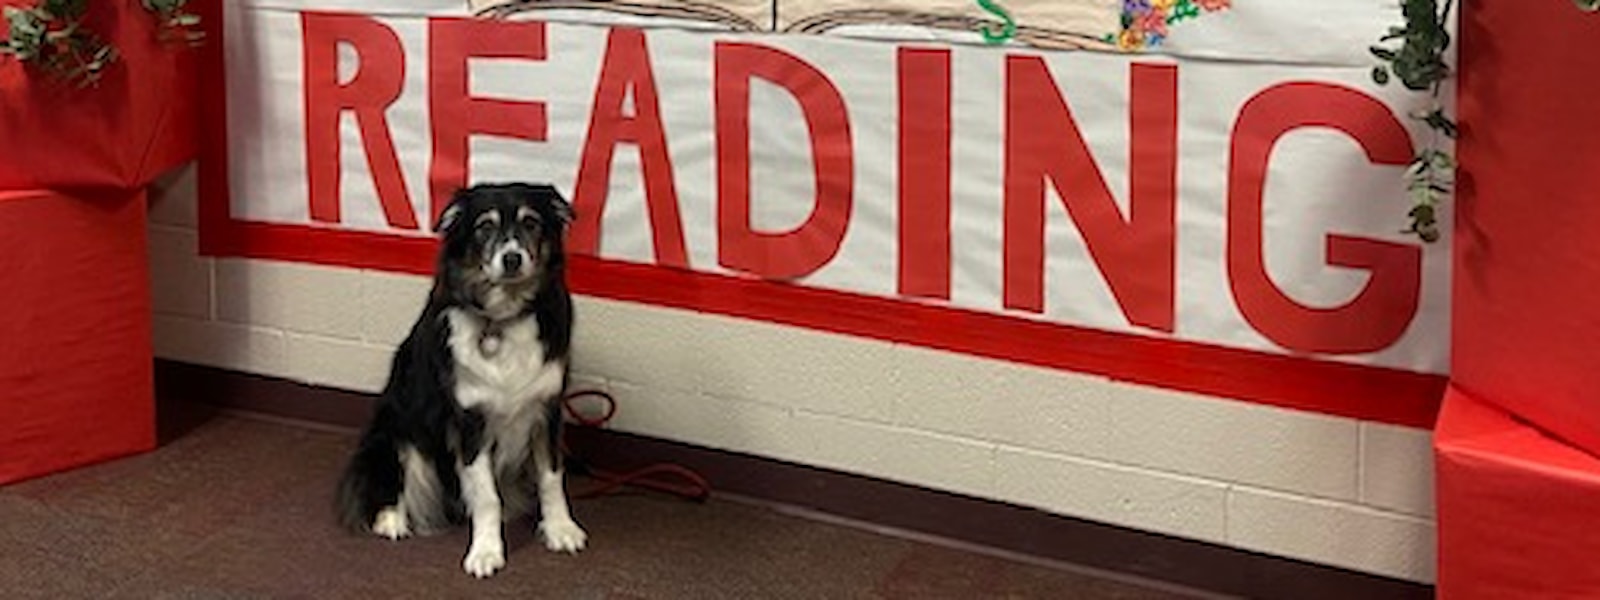 Therapy dog standing in front of reading poster